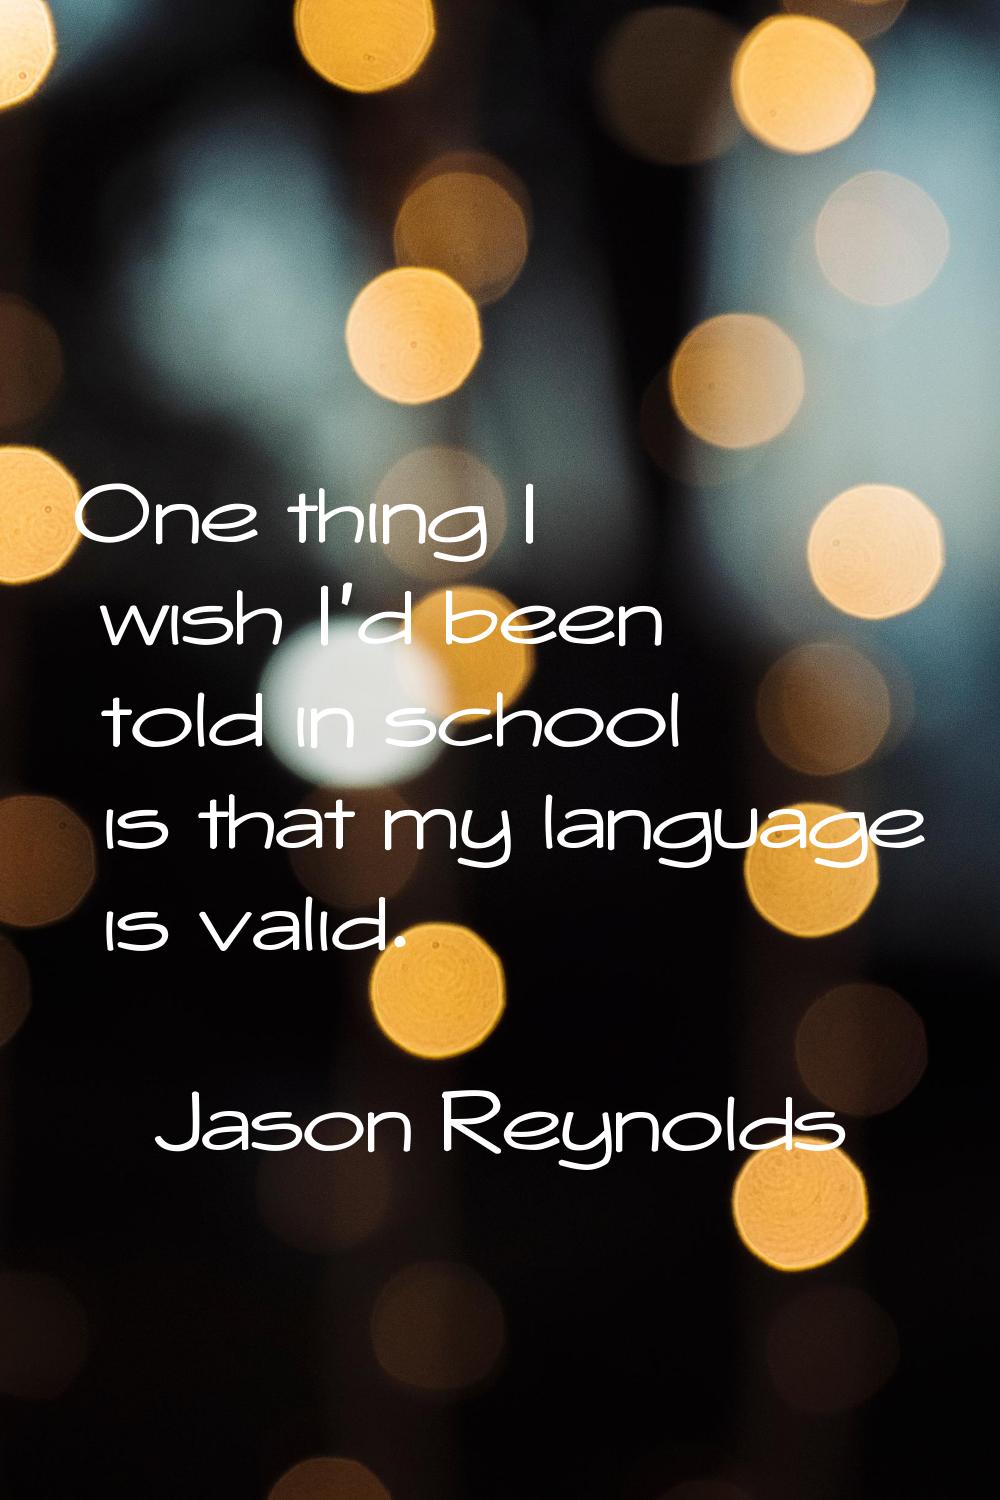 One thing I wish I'd been told in school is that my language is valid.